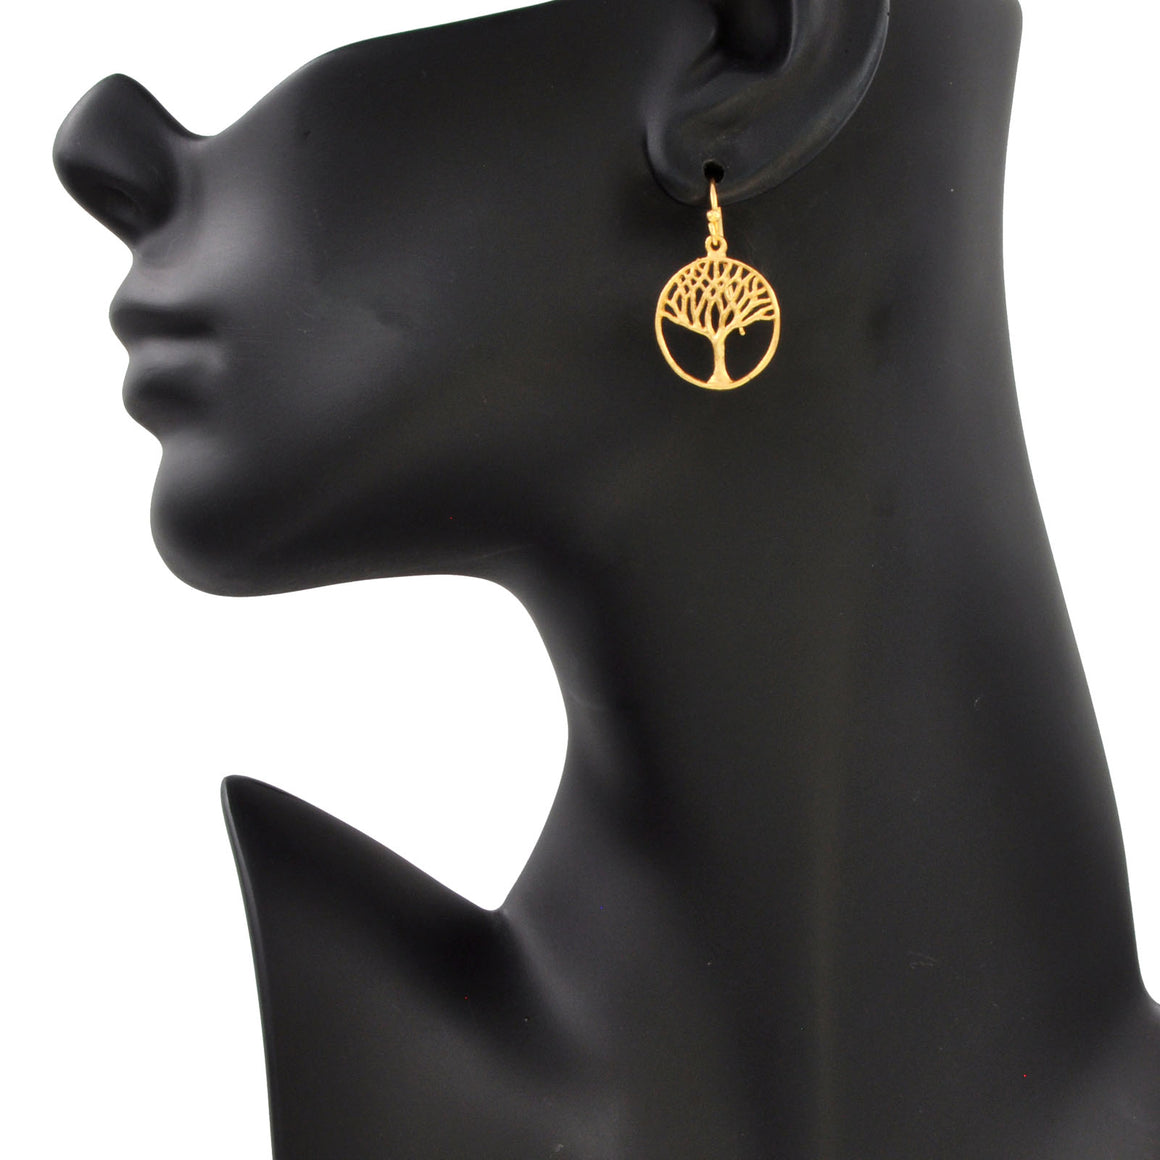 Tree of Life Earrings (Small) - 24K Gold Plated